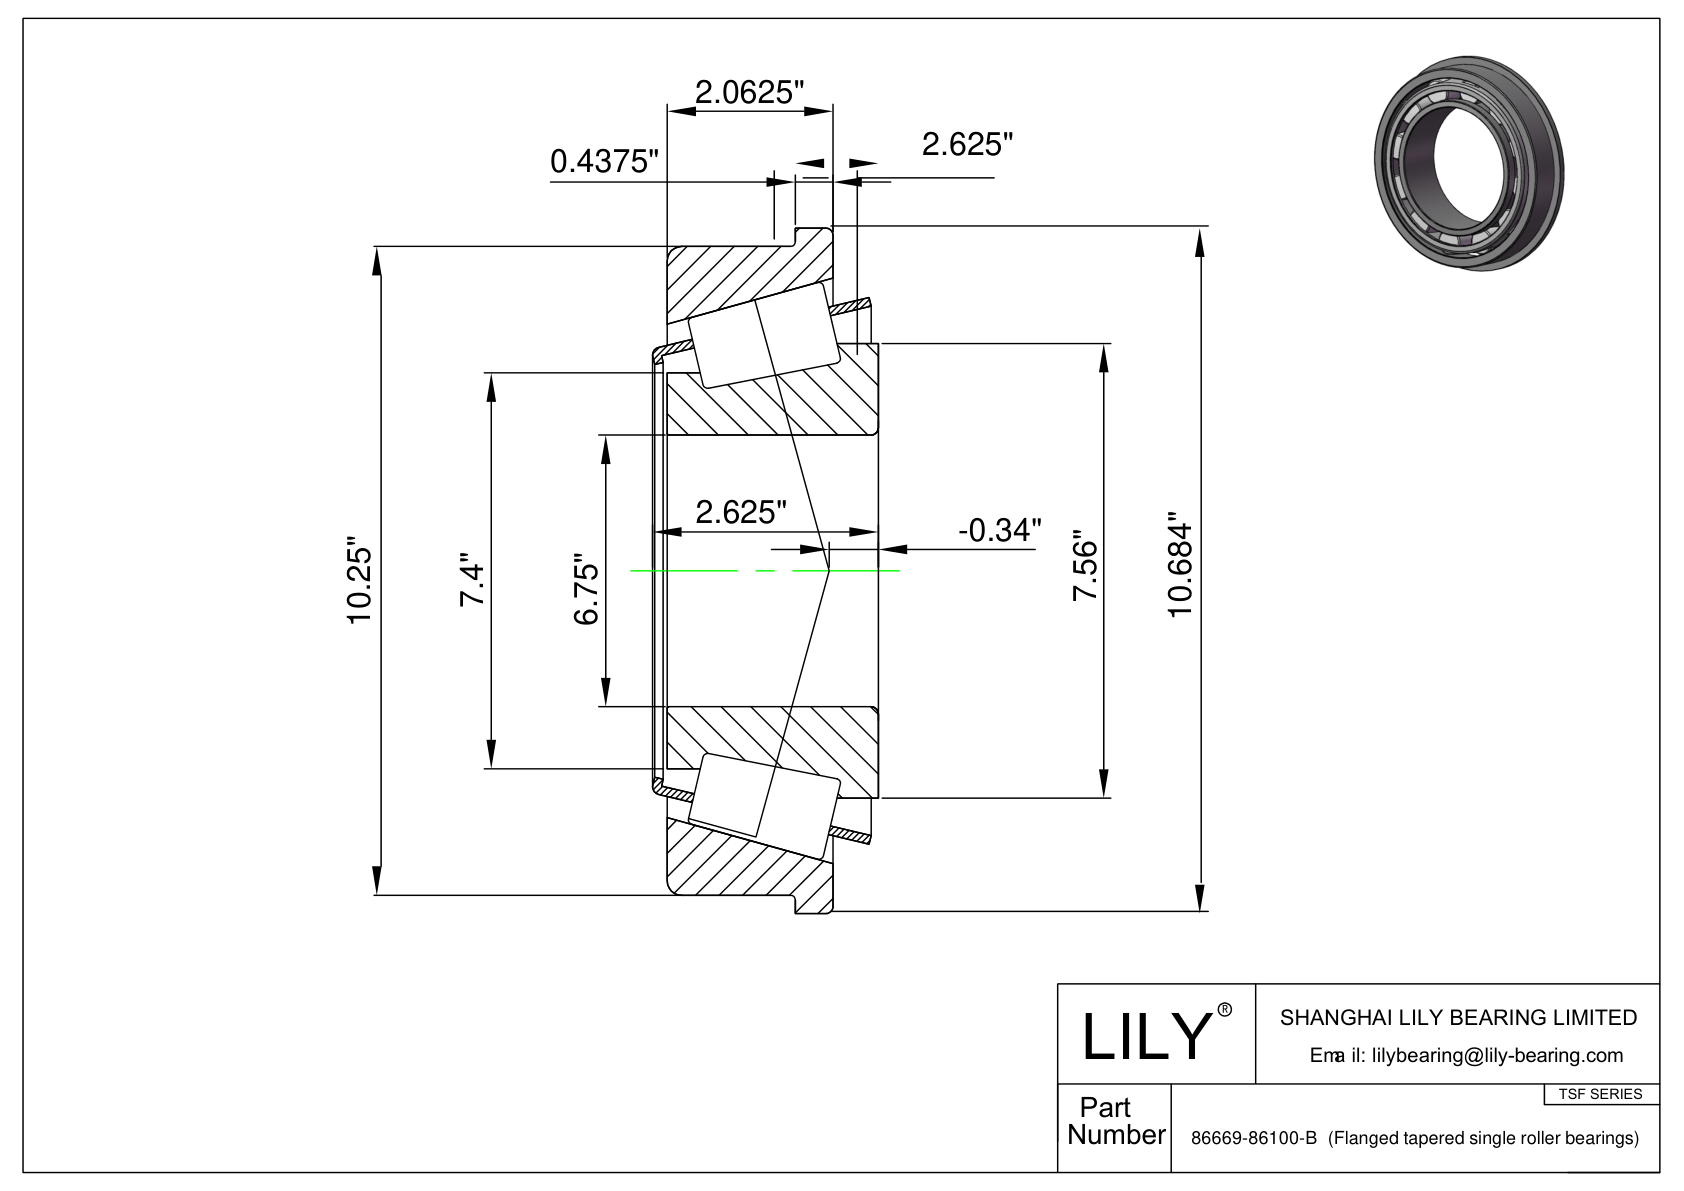 HM535349-HM535310-B TSF (Tapered Single Roller Bearings with Flange) (Imperial) cad drawing